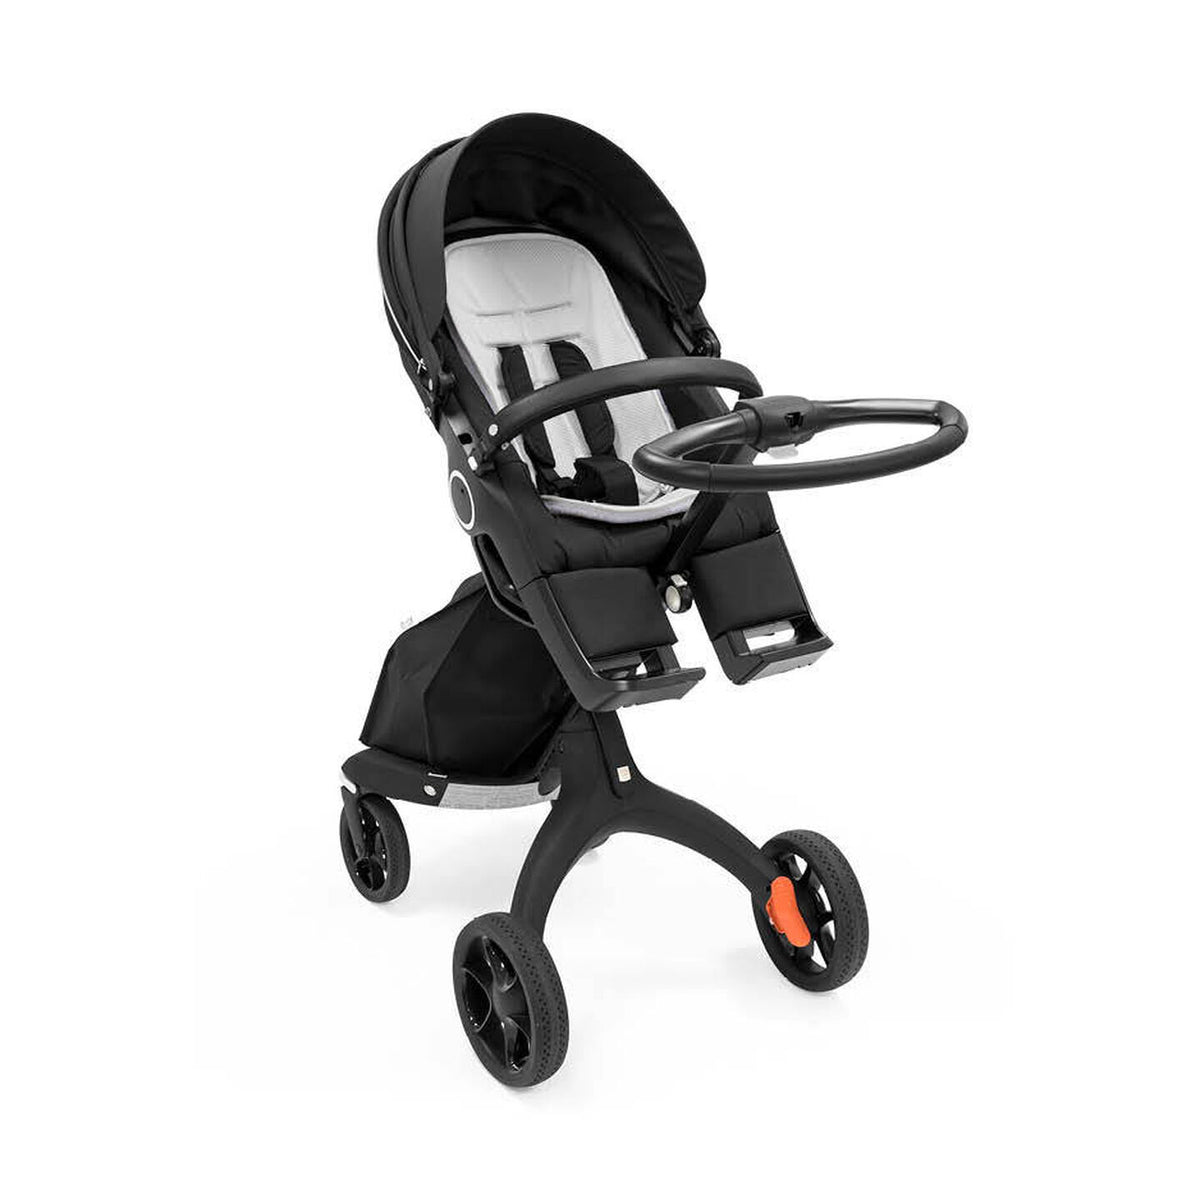 Stokke Stroller All Weather Inlay | fawnu0026forest